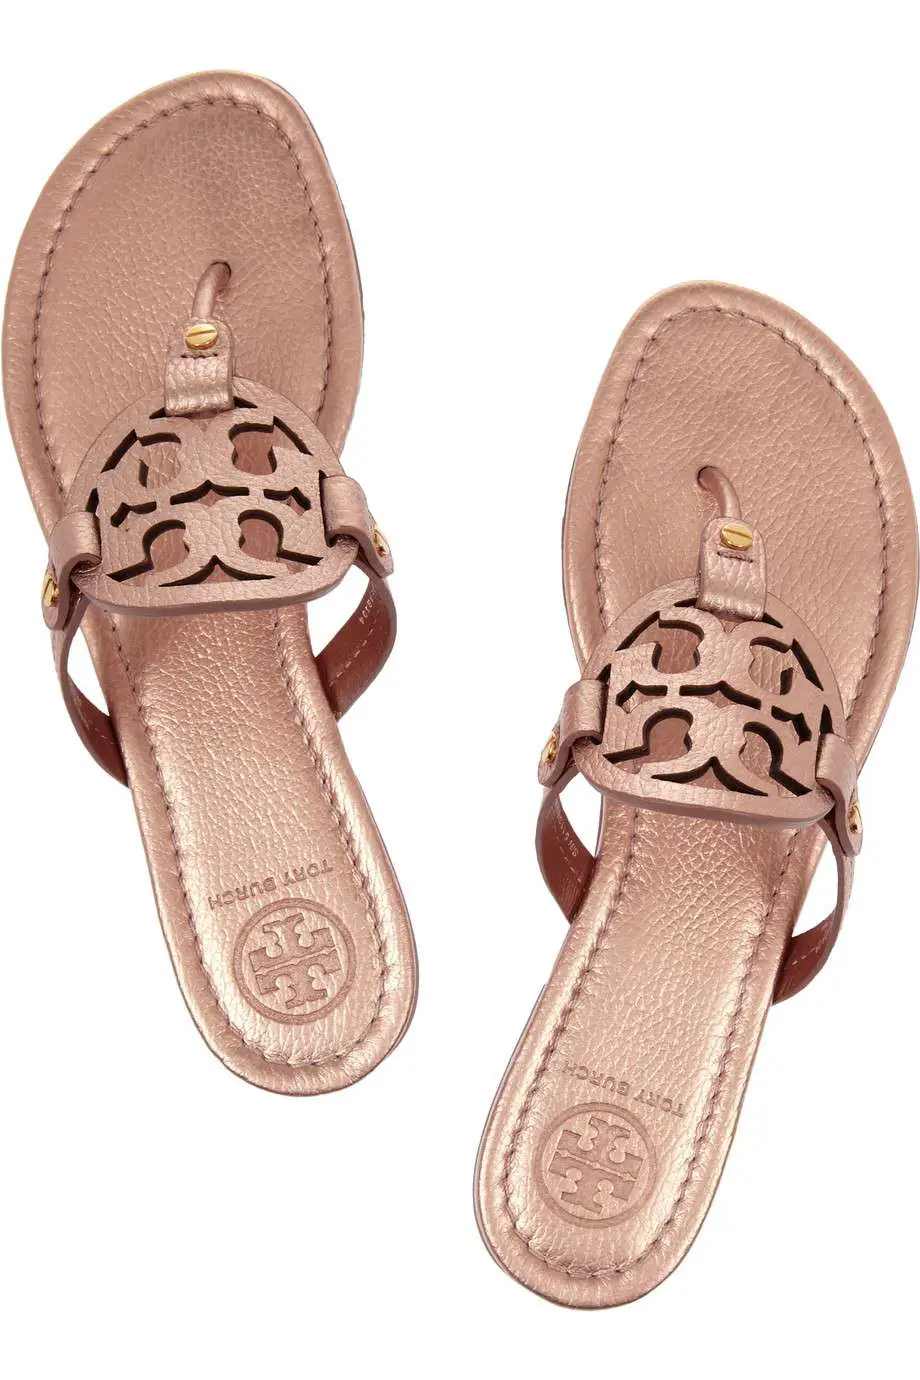 Tory Burch Miller Metallic Leather Sandals in Rose Gold (Pink)